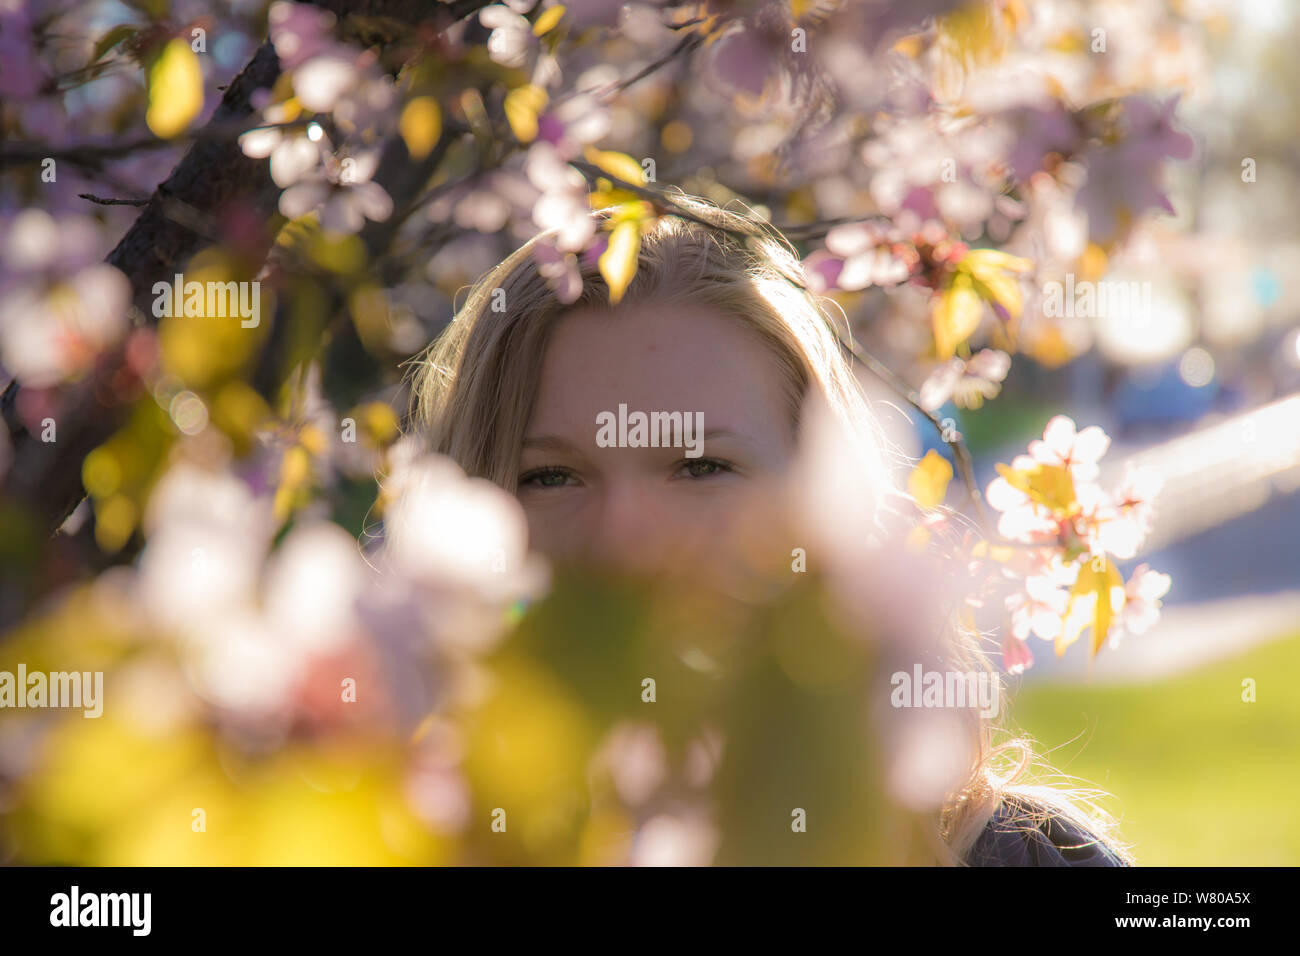 Woman looking through cherry branches Stock Photo